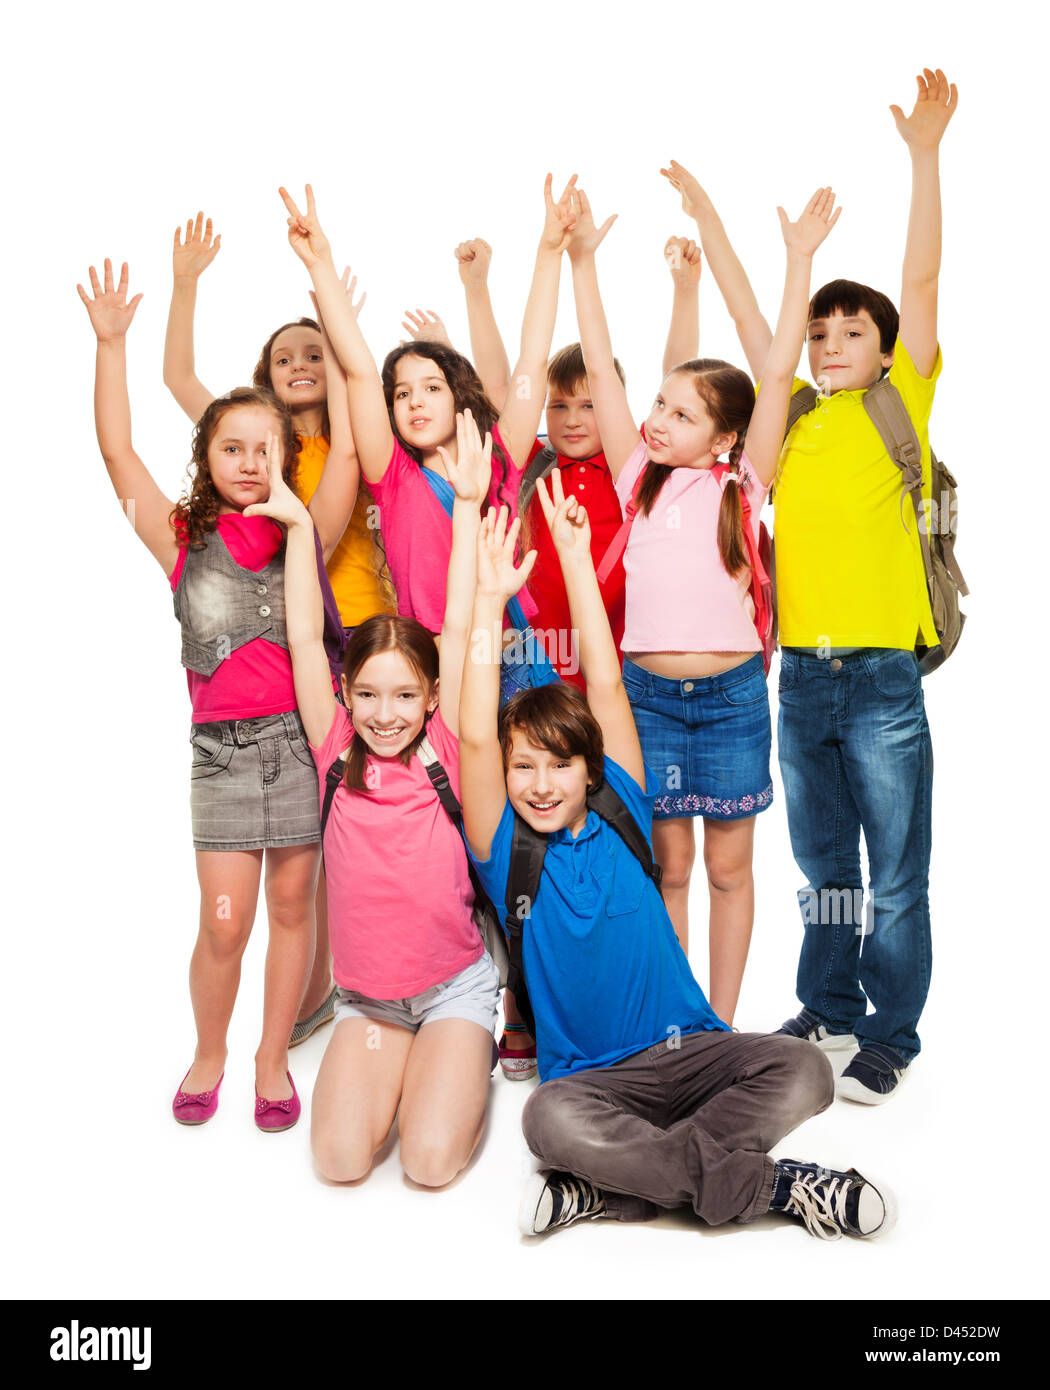 Group of happy kids, boys and girls lifting hands standing on white Stock Photo